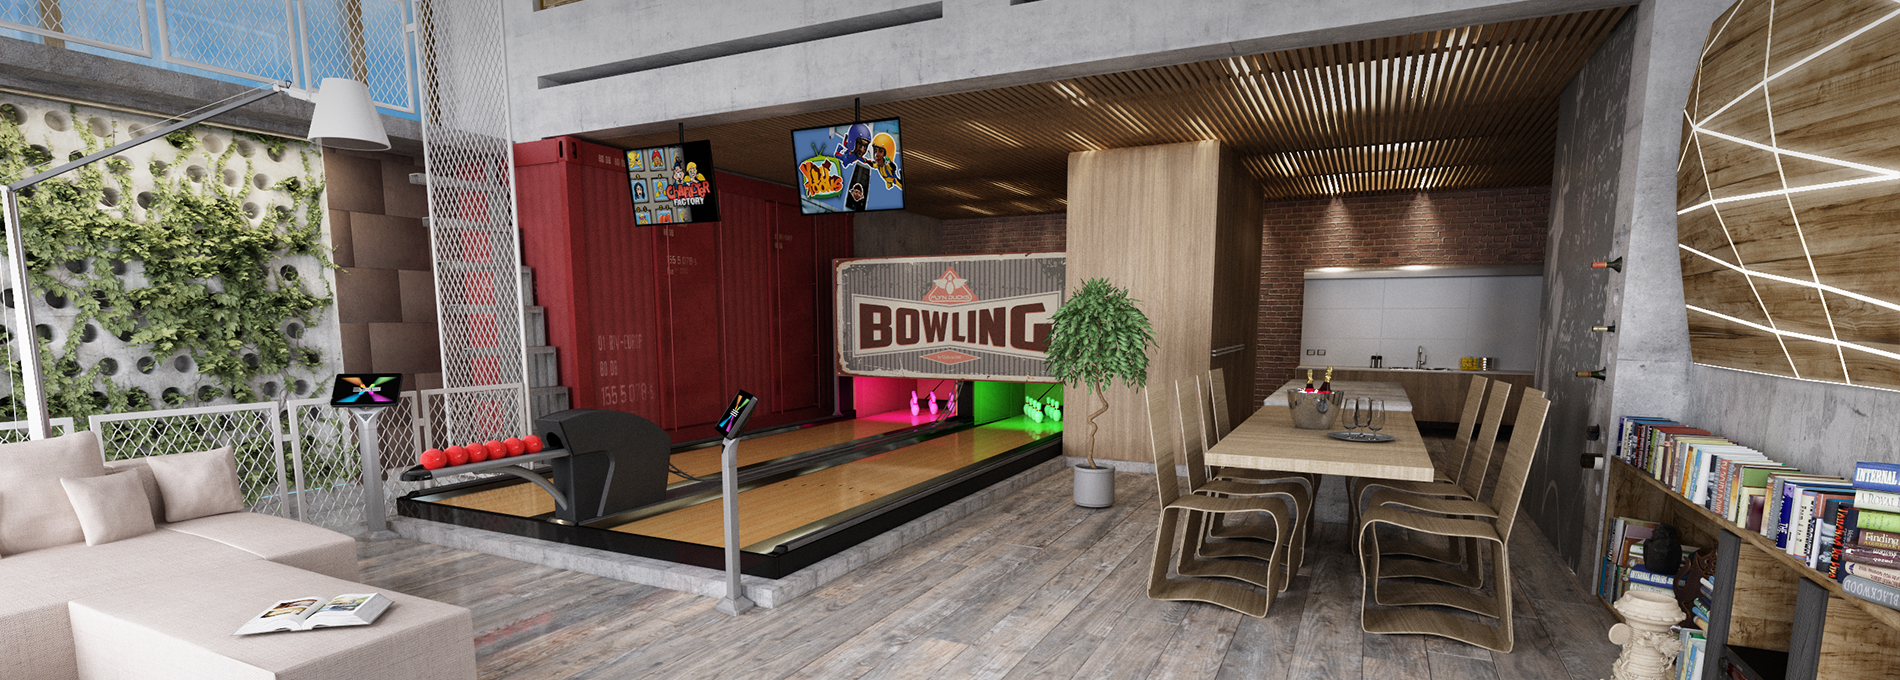 qubicaamf-bowling-home- create banner 3